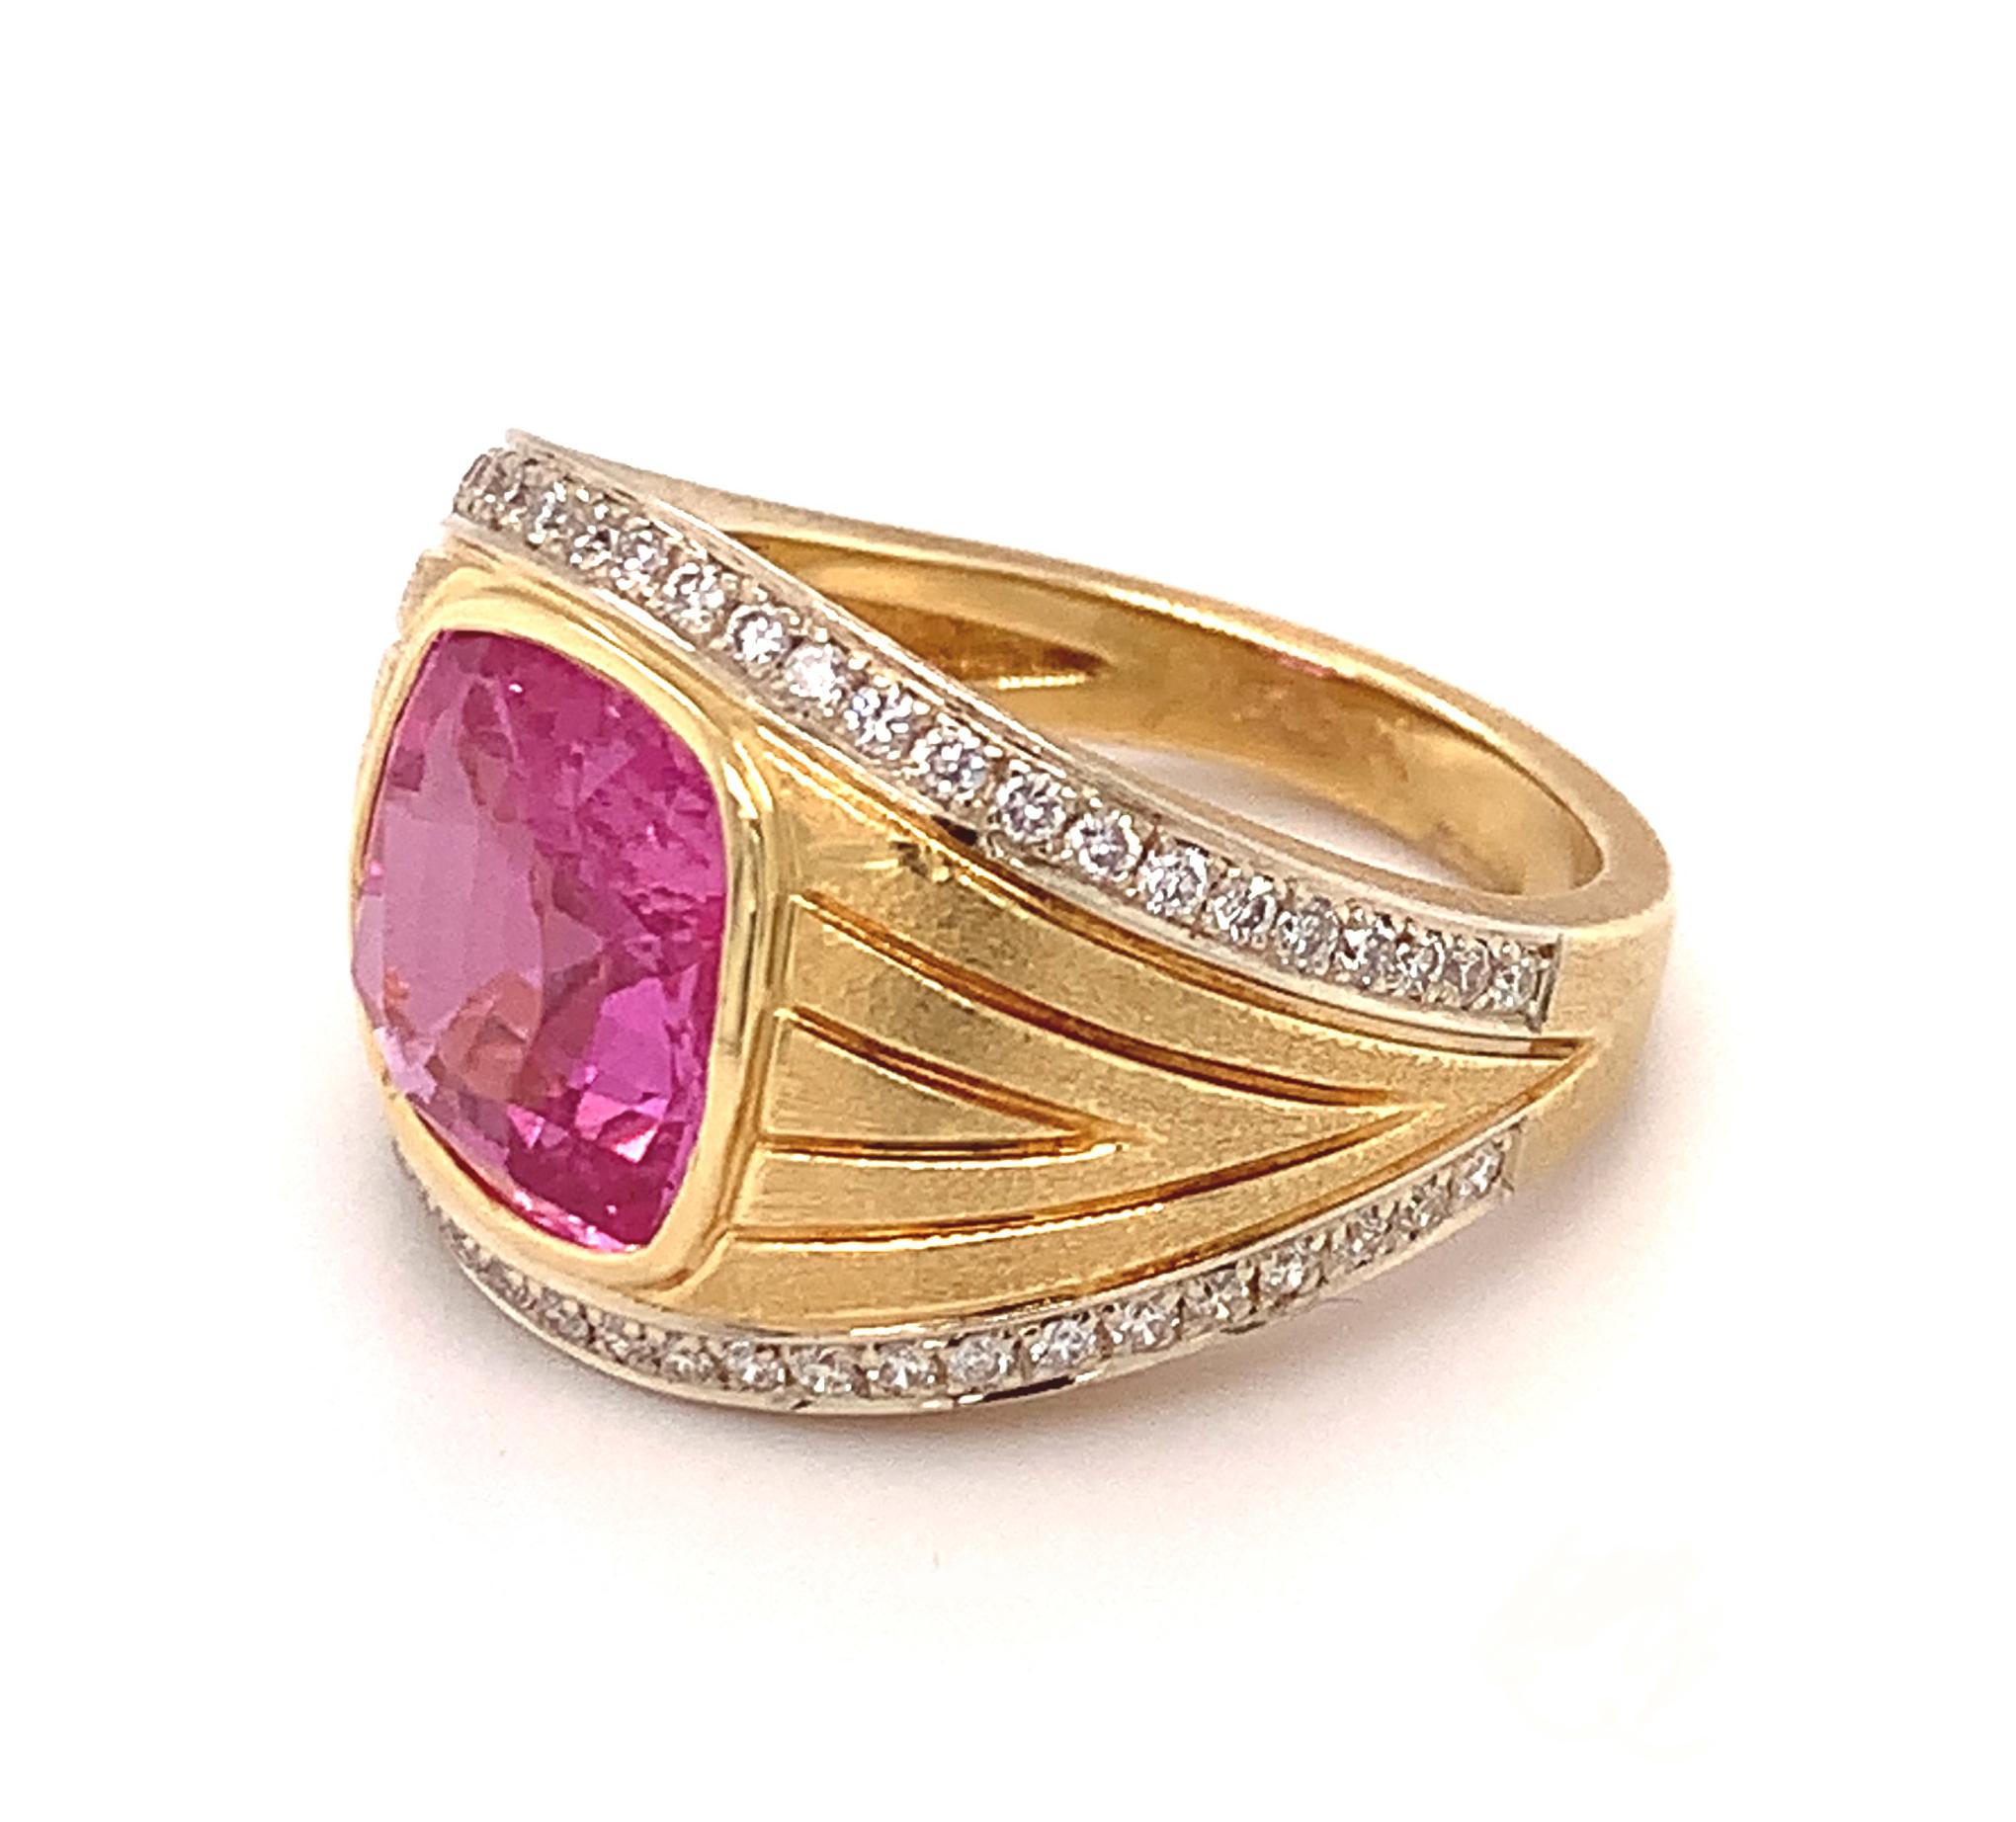 Cushion Cut GIA Certified 5.20 Carat Pink Sapphire and Diamond Ring in 18k Gold For Sale